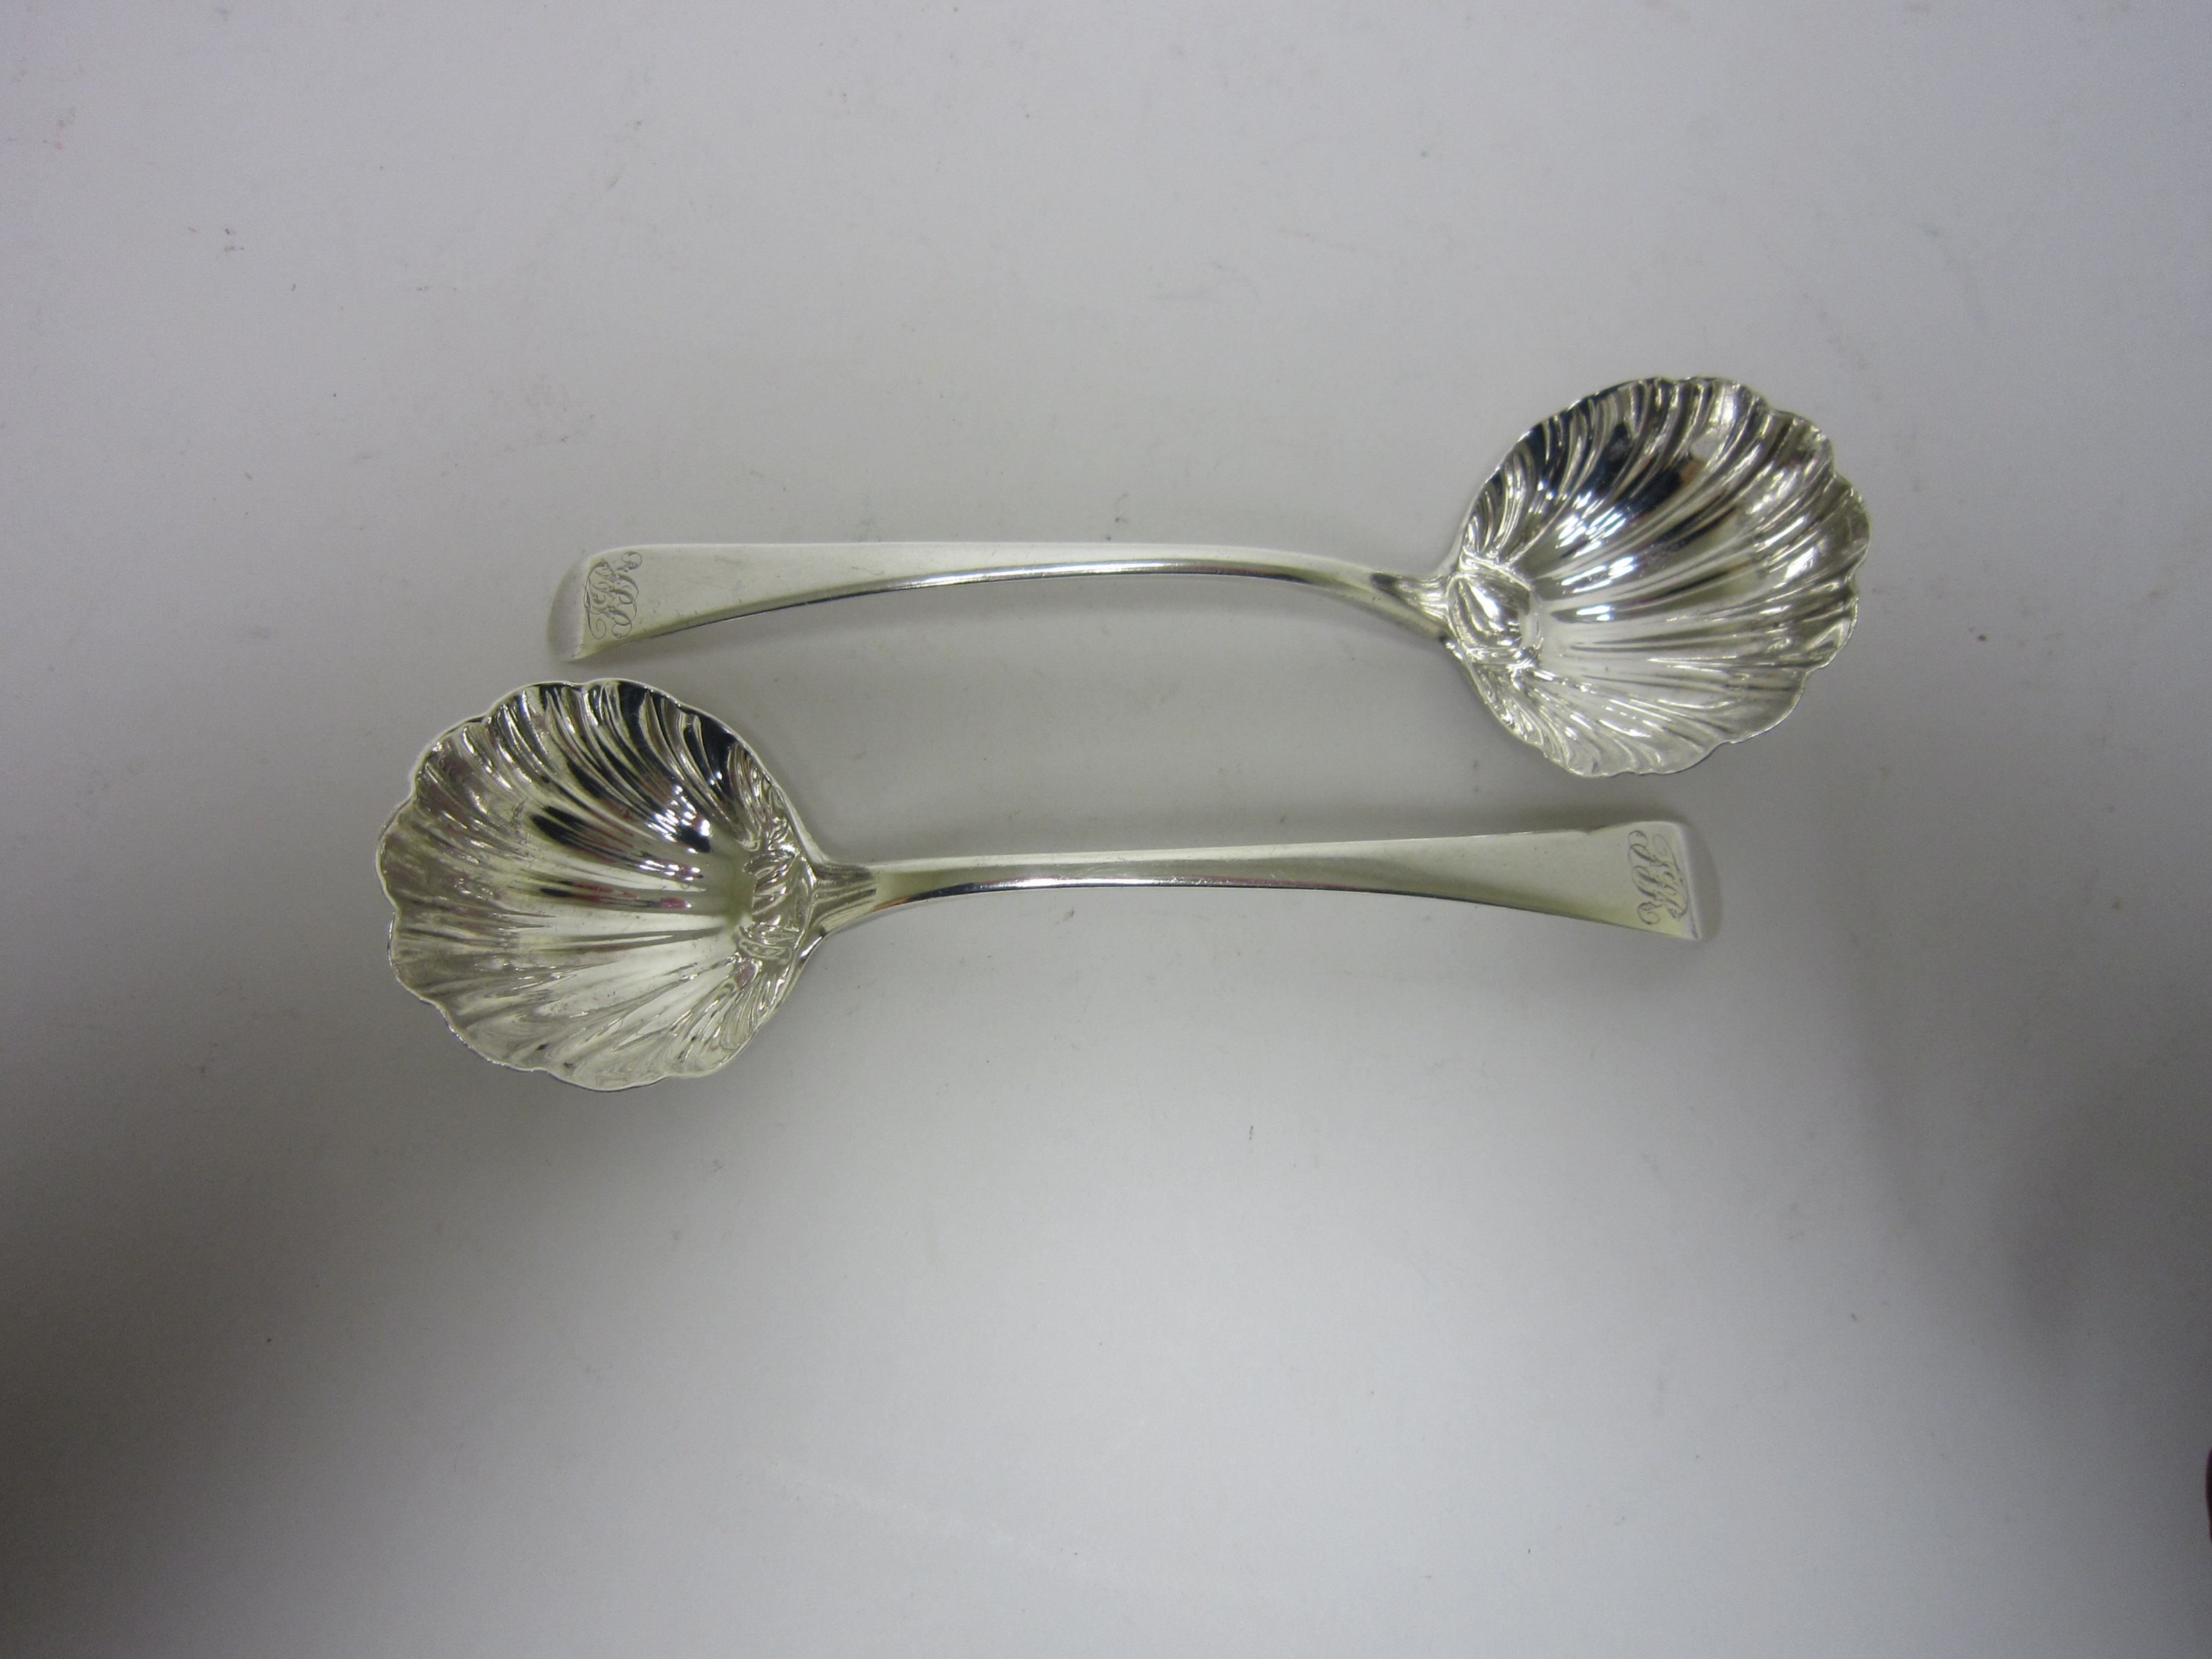 Pair of George III silver Sauce Ladles old english pattern engraved initials, shell bowls, London - Image 2 of 3